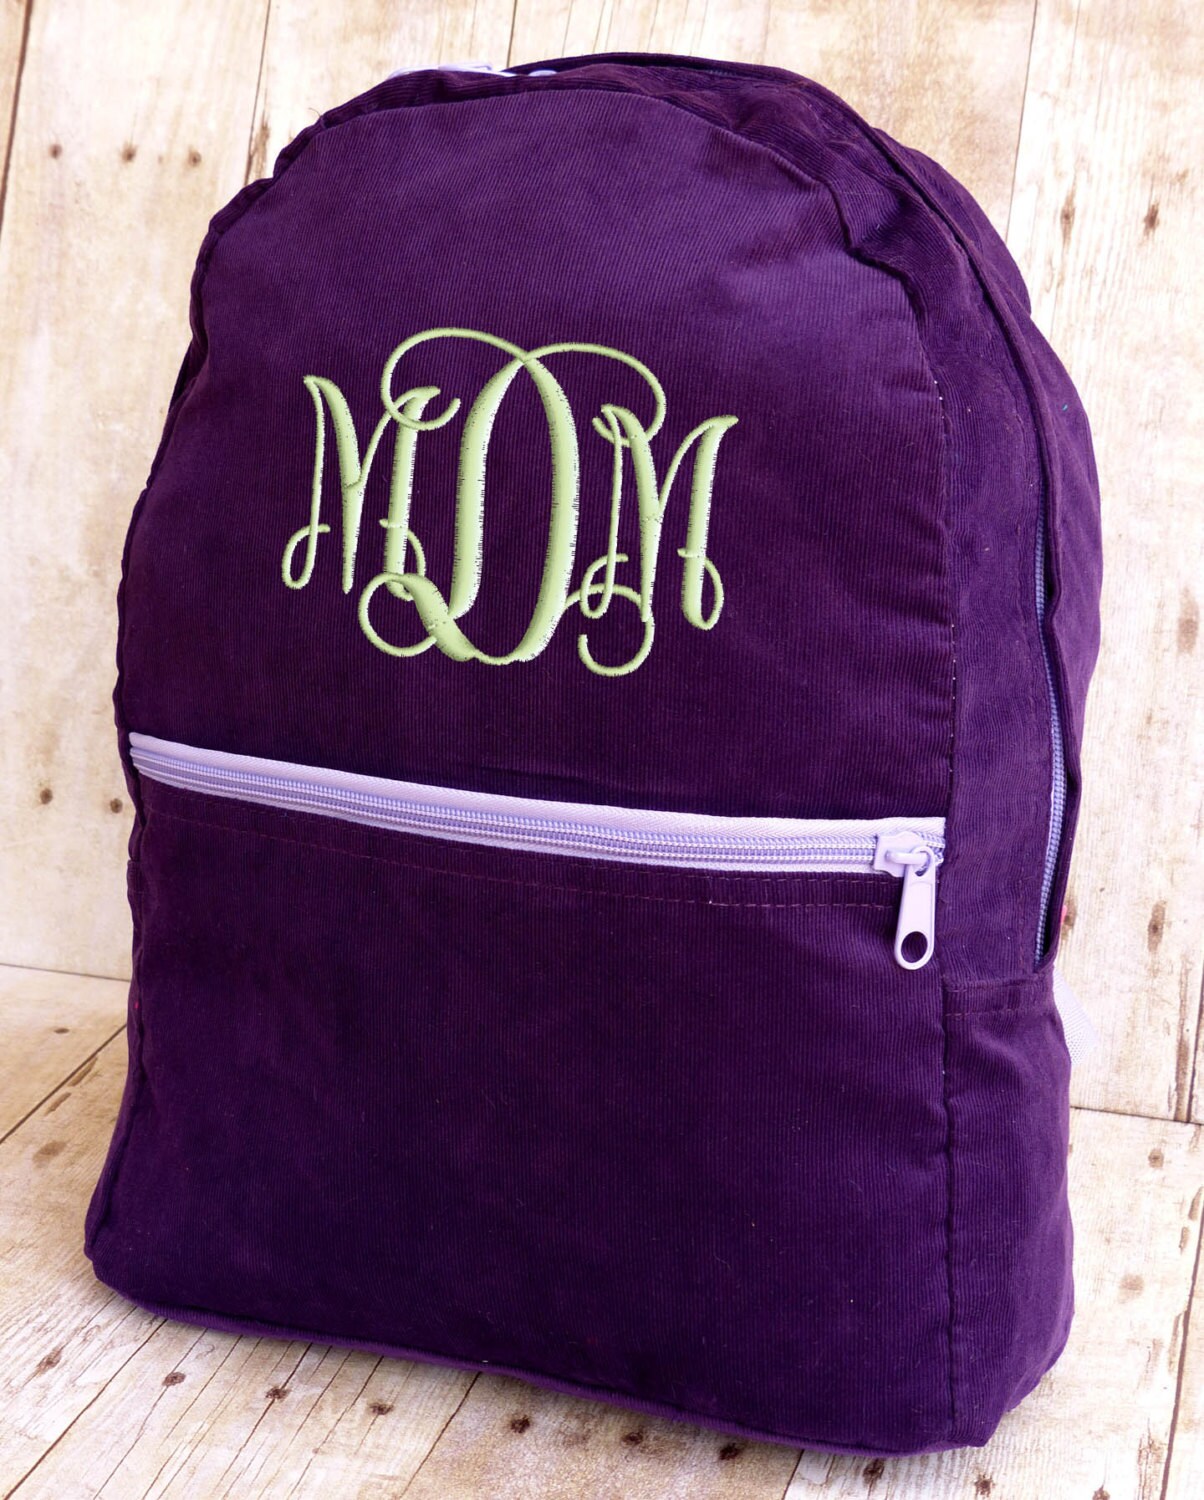 Toddler Backpack Personalized Purple Corduroy Monogrammed